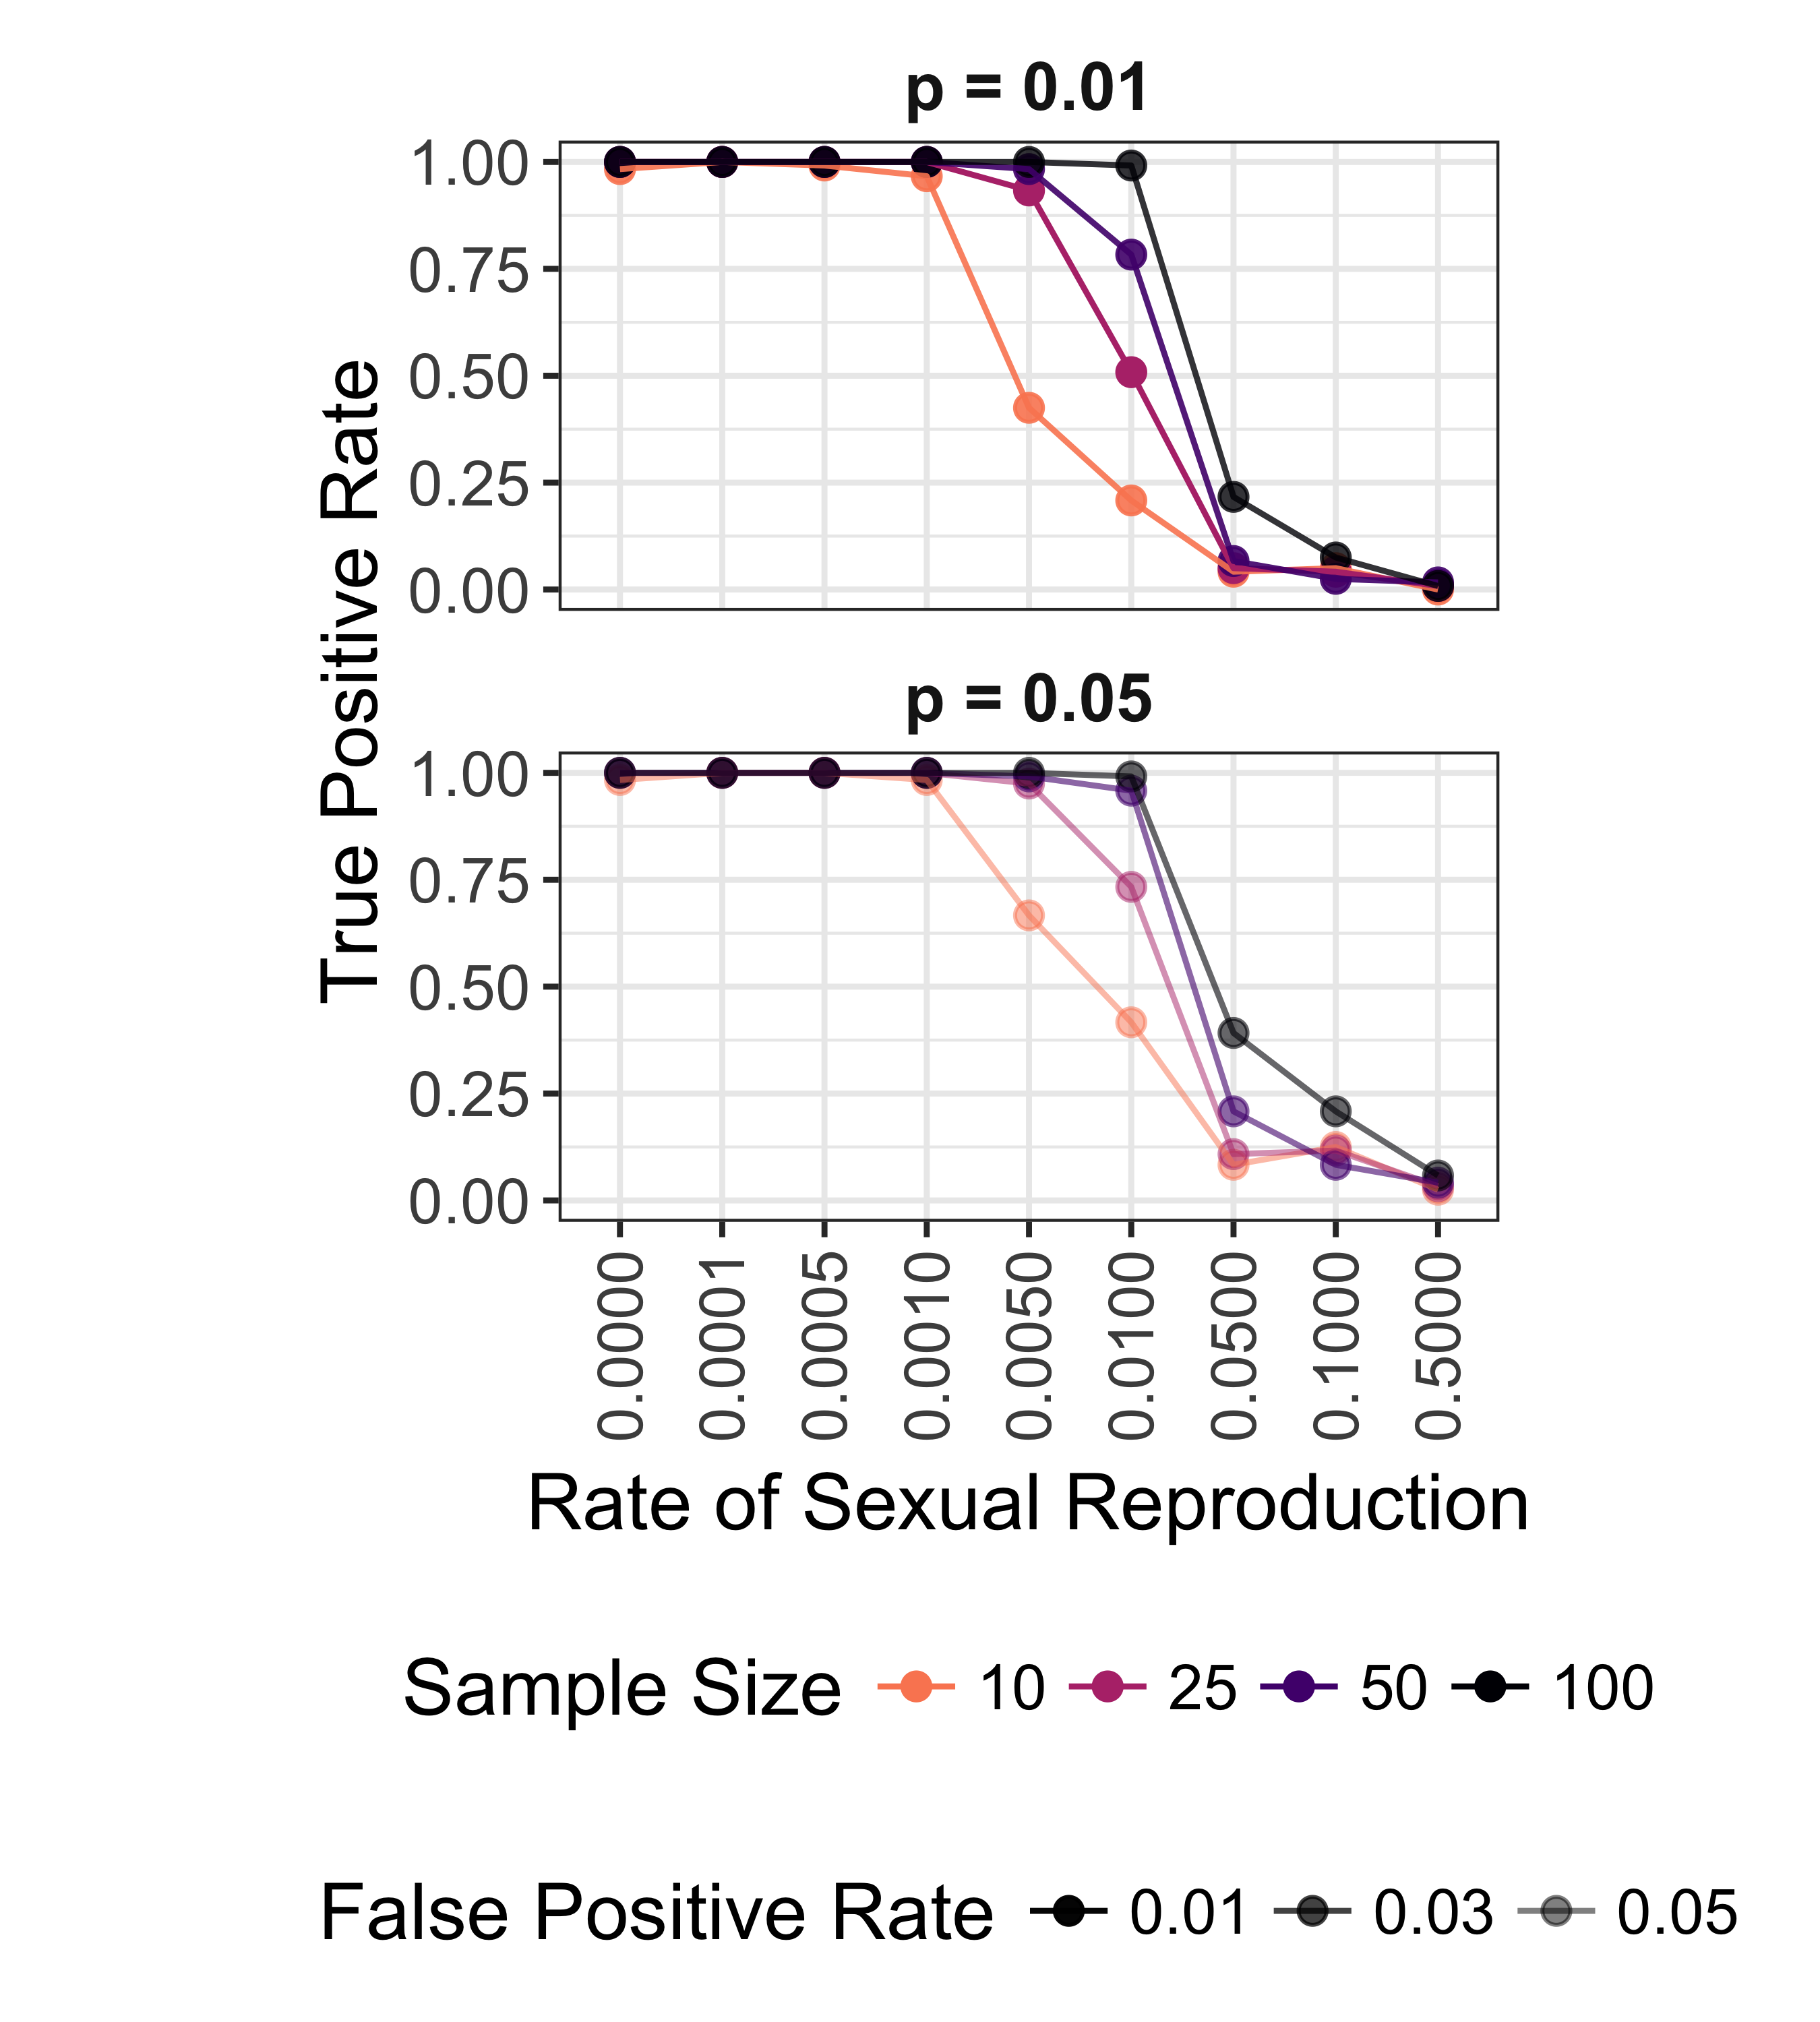 Effect of rate of sexual reproduction and sample size (n) the power to 
detect non-random mating for SNP data. Color indicates sample size. False
positive rate is shown as increasing transparency. Data shown for both p = 0.01
and p = 0.05